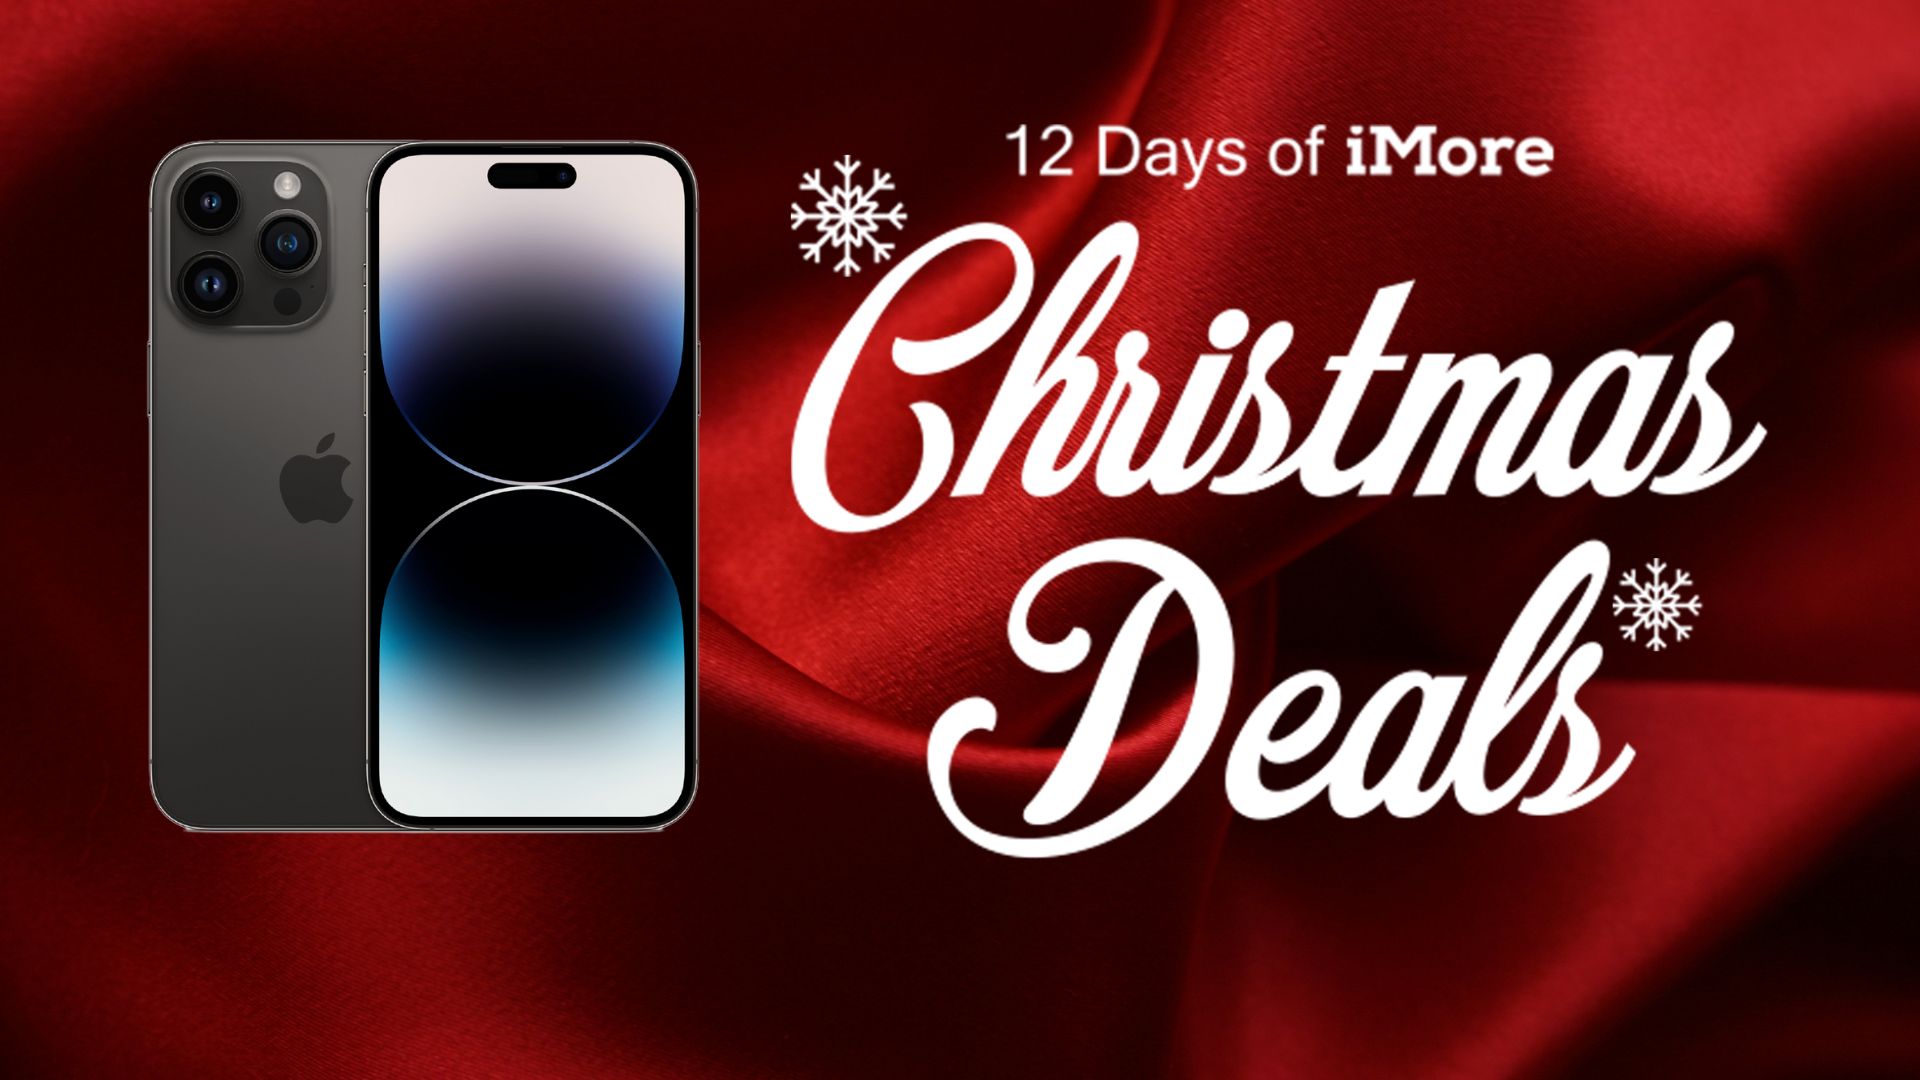 Trade in and save up to 1000 on an iPhone 14 Pro at Verizon and you